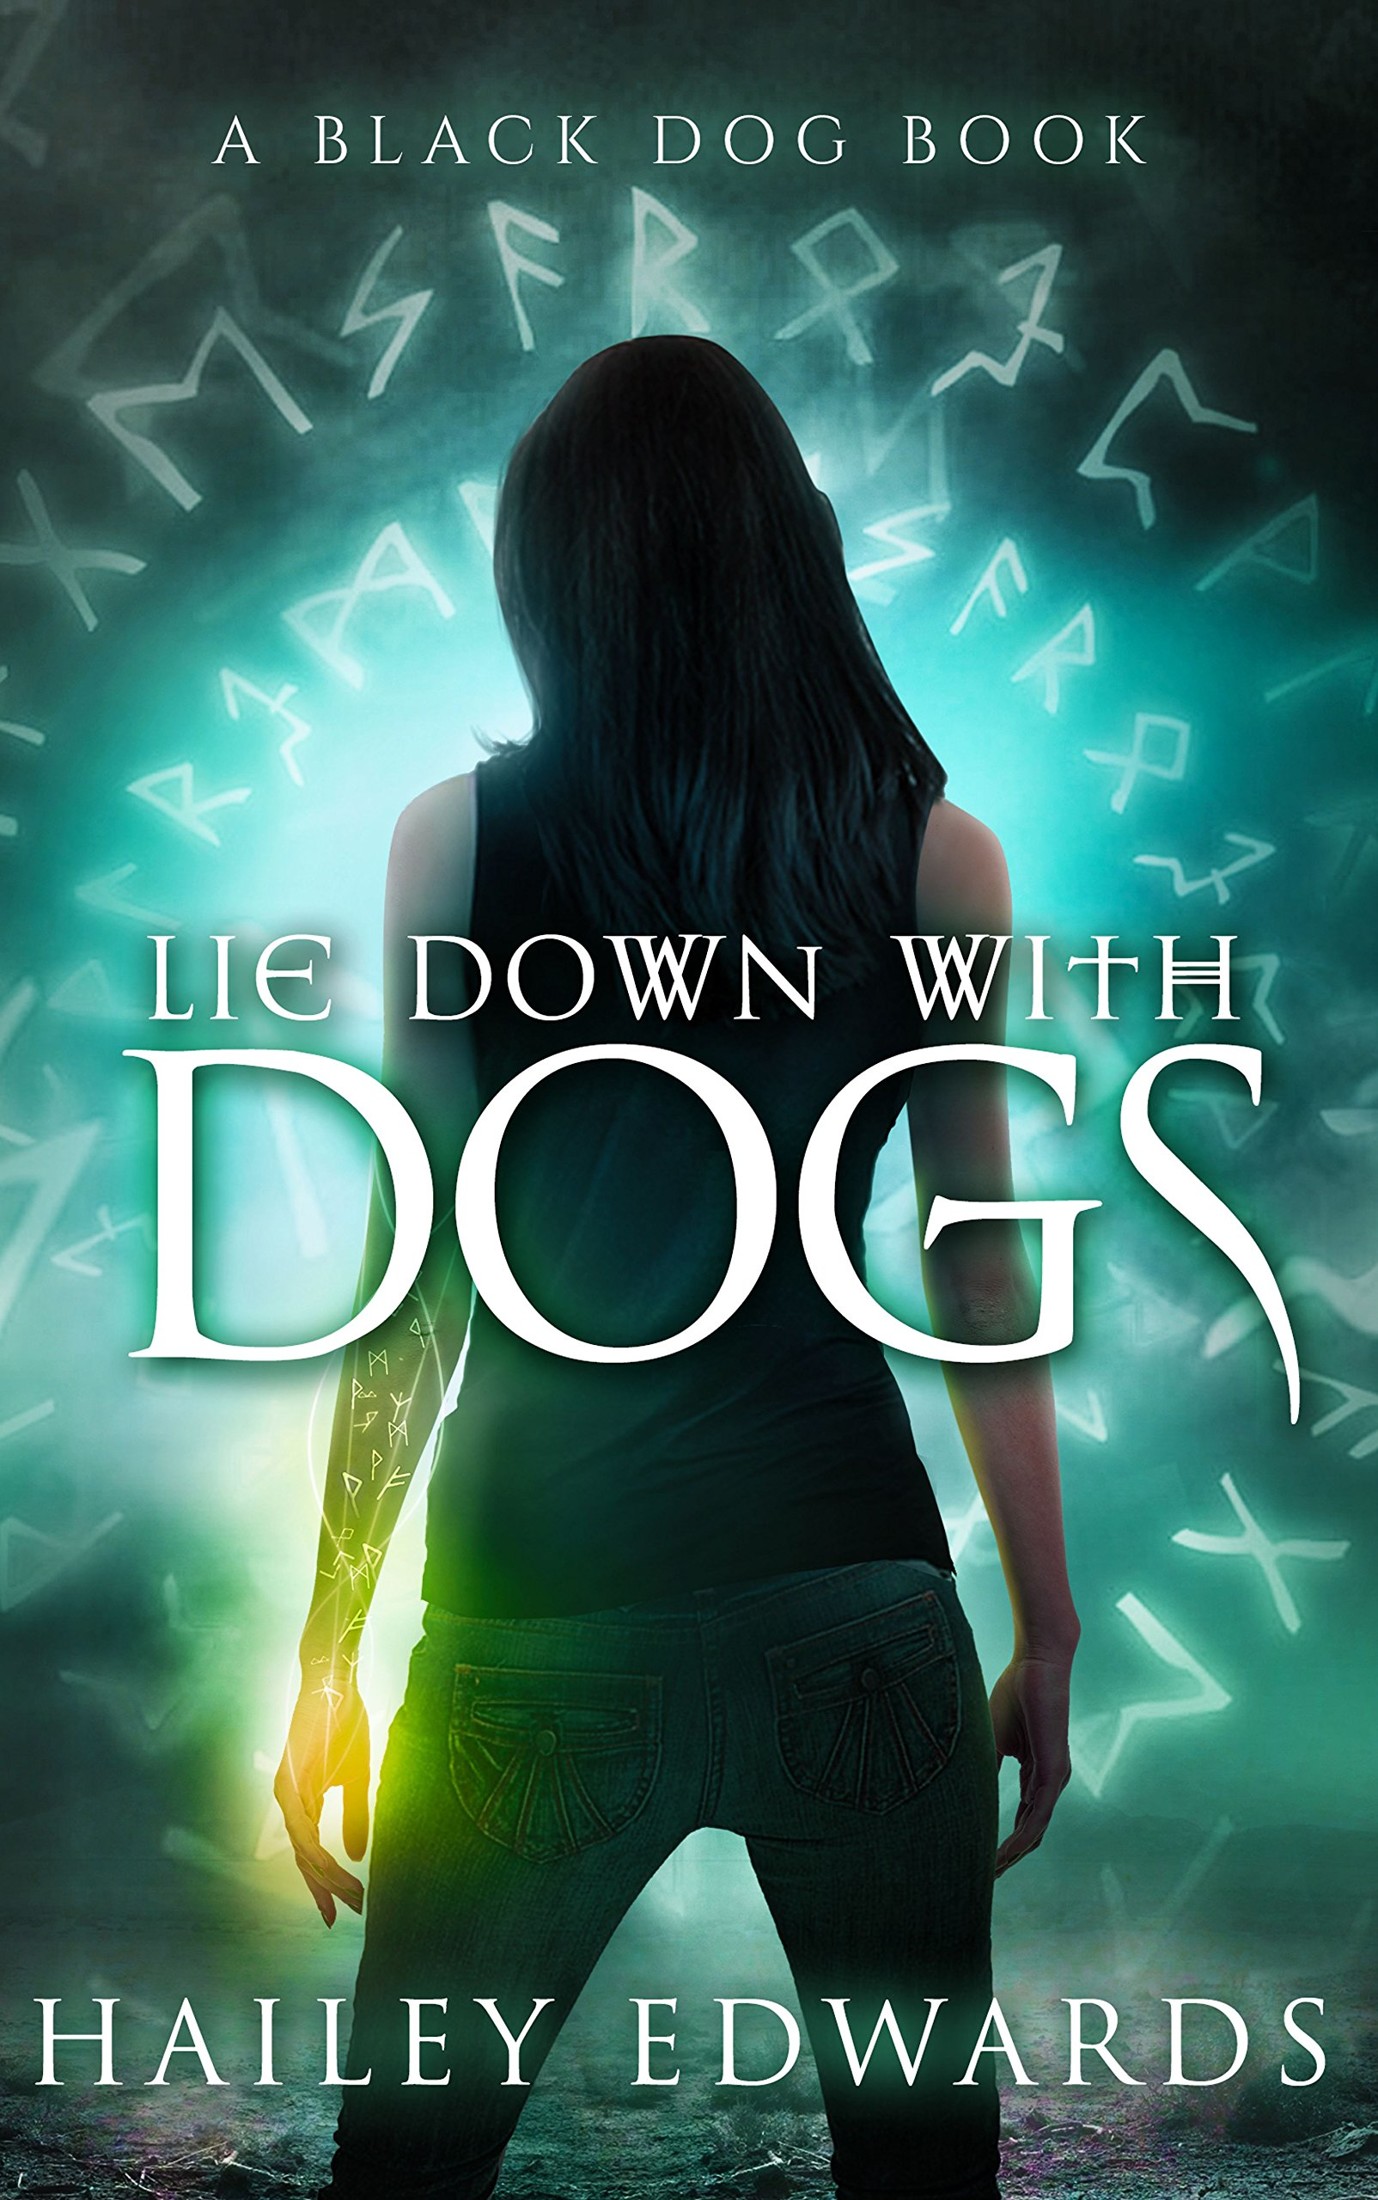 Lie Down With Dogs (Black Dog Book 3)